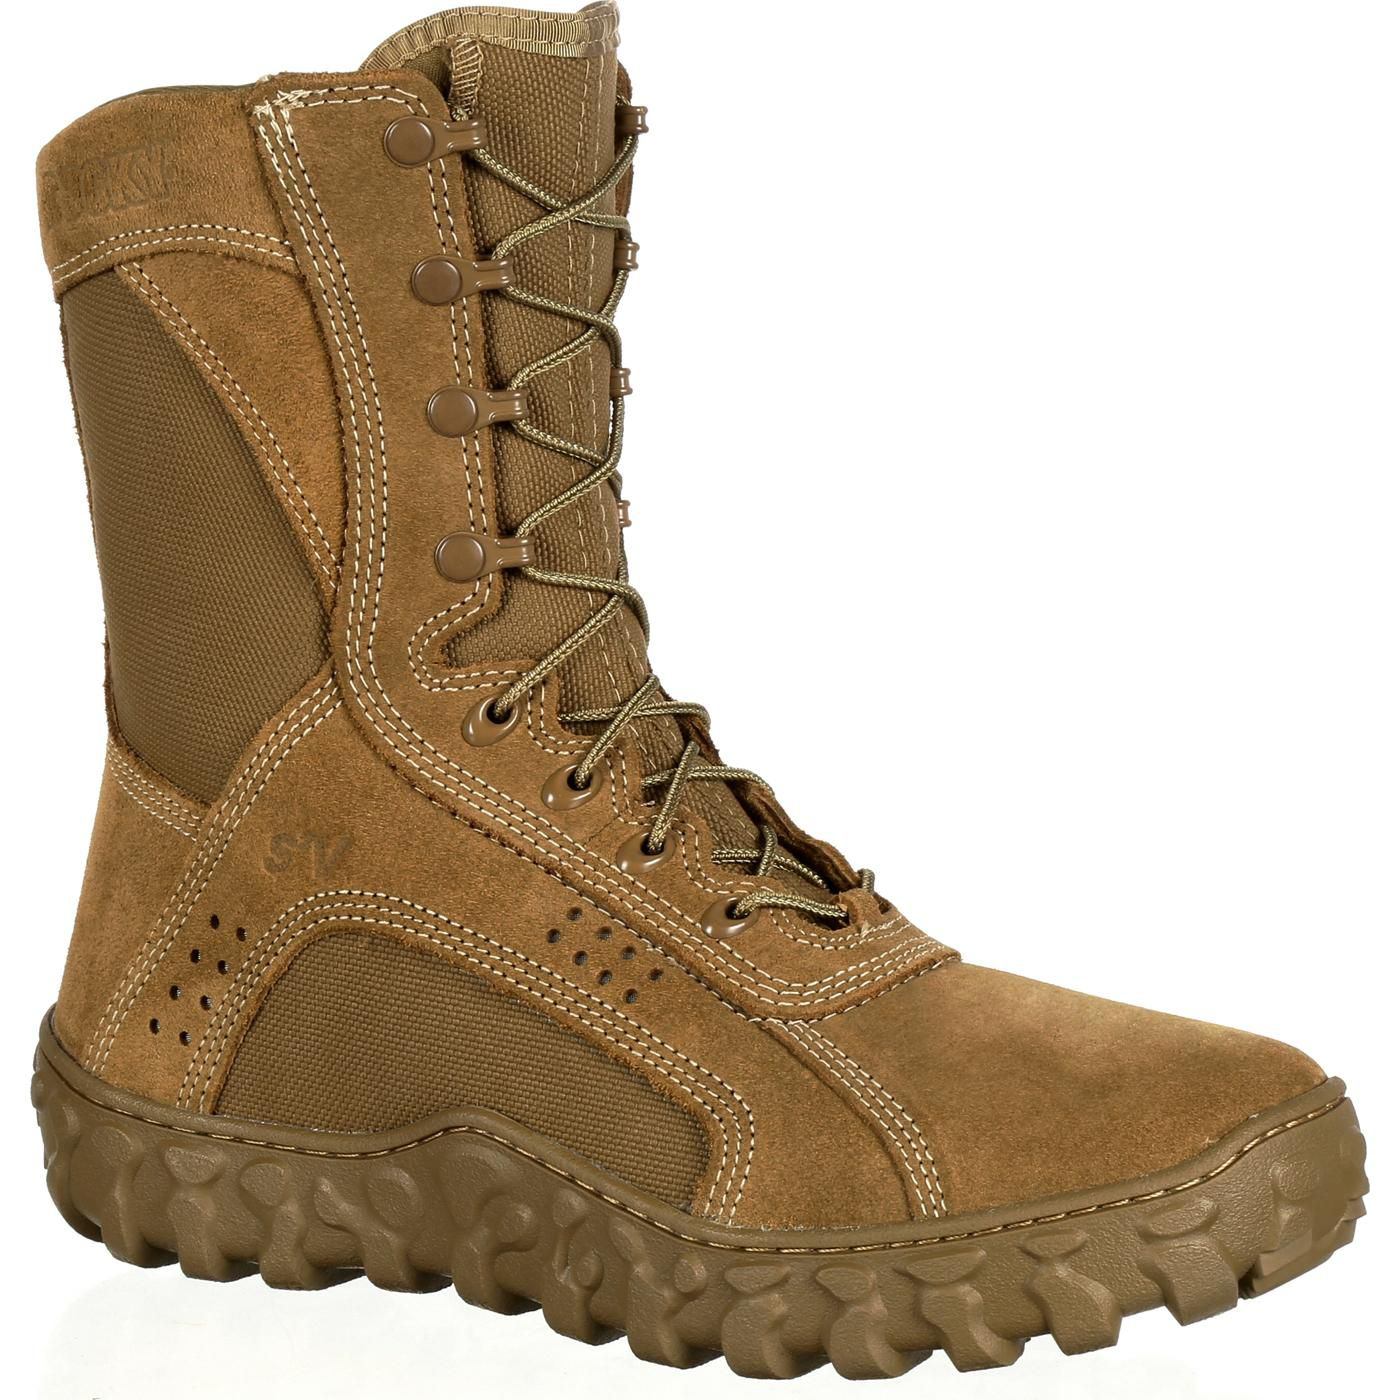 Rocky S2V Tactical Military Boots for Men - Coyote Brown - 14M